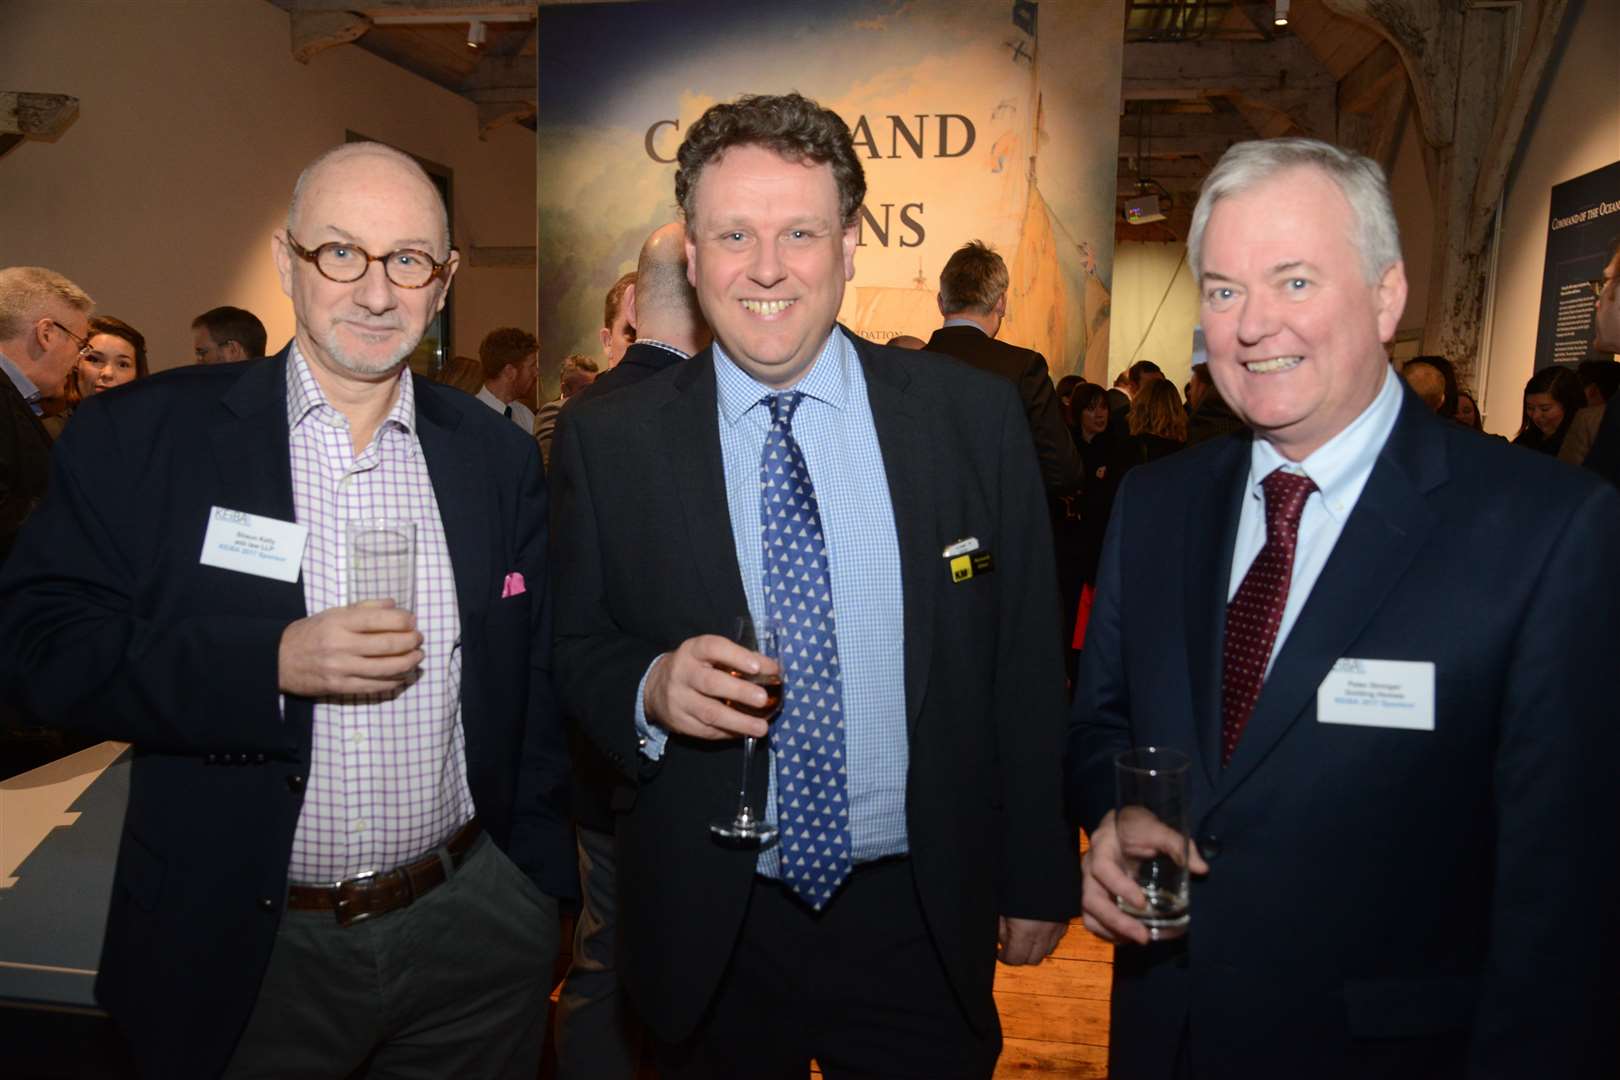 From left, Shaun Kelly of asb law, KM Group managing director Richard Elliot and Peter Stringer of Golding Homes